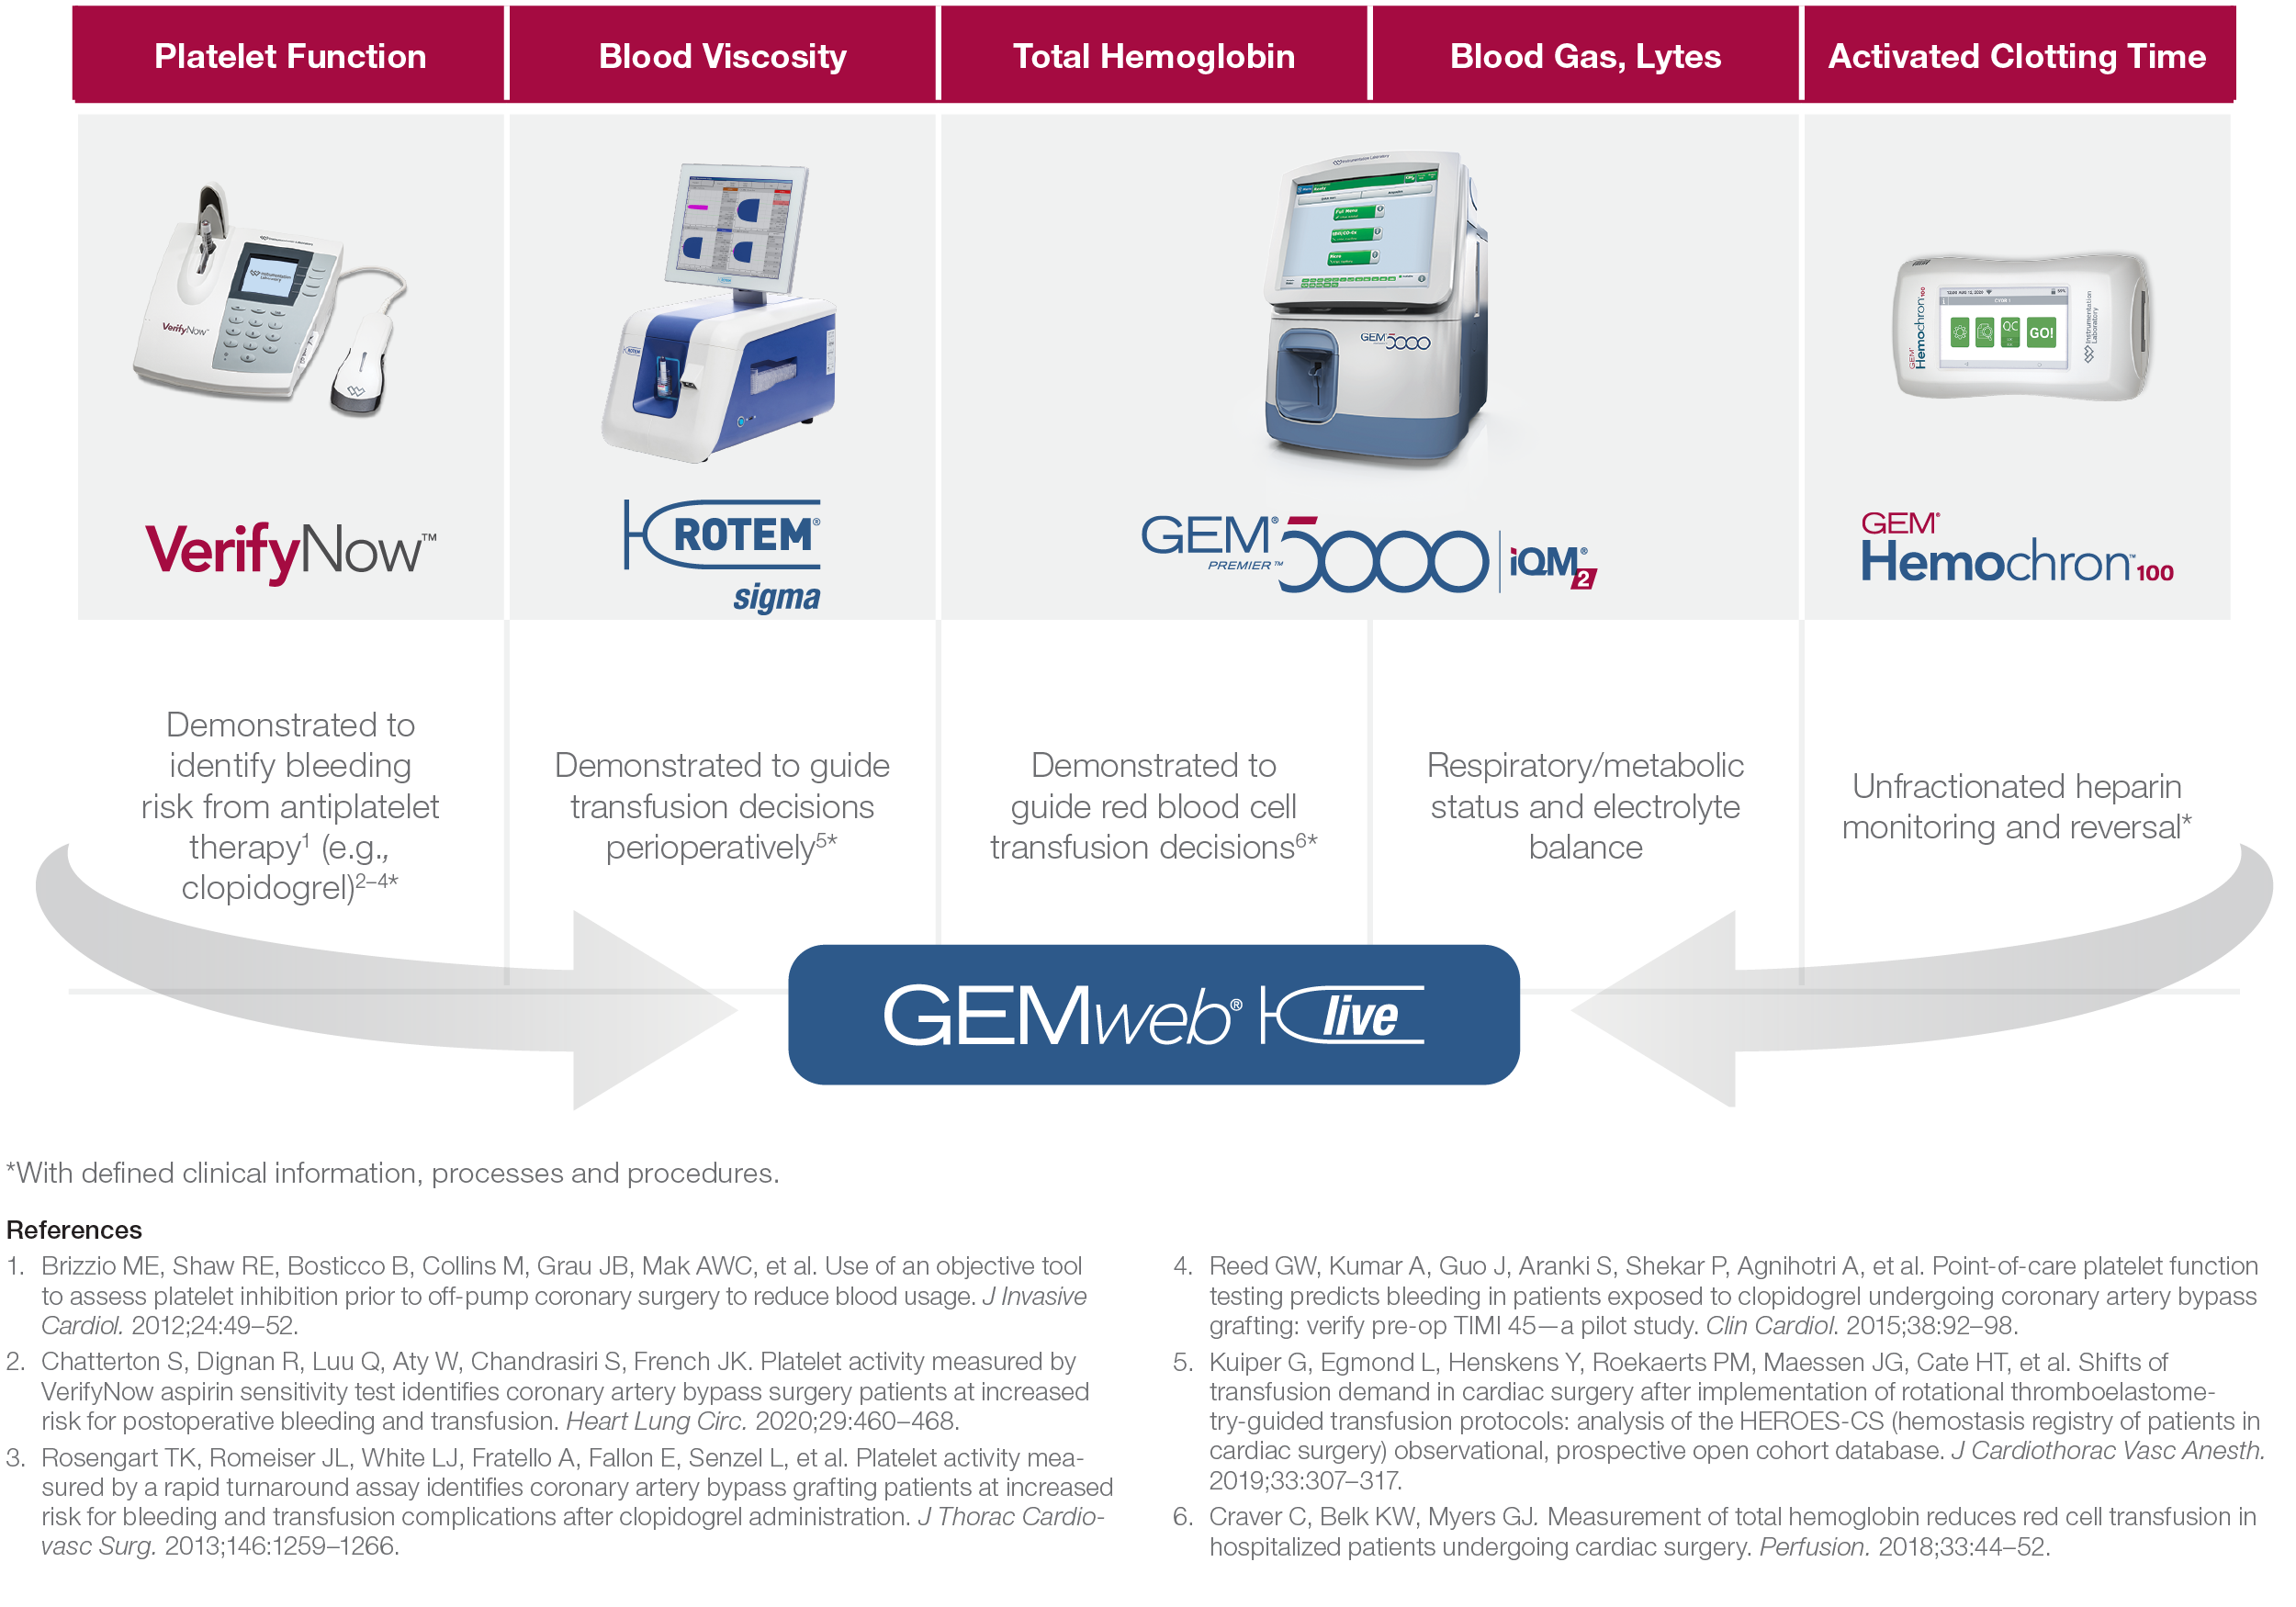 GEMweb Live rapidly displays results from these 4 Werfen systems to help guide patient management